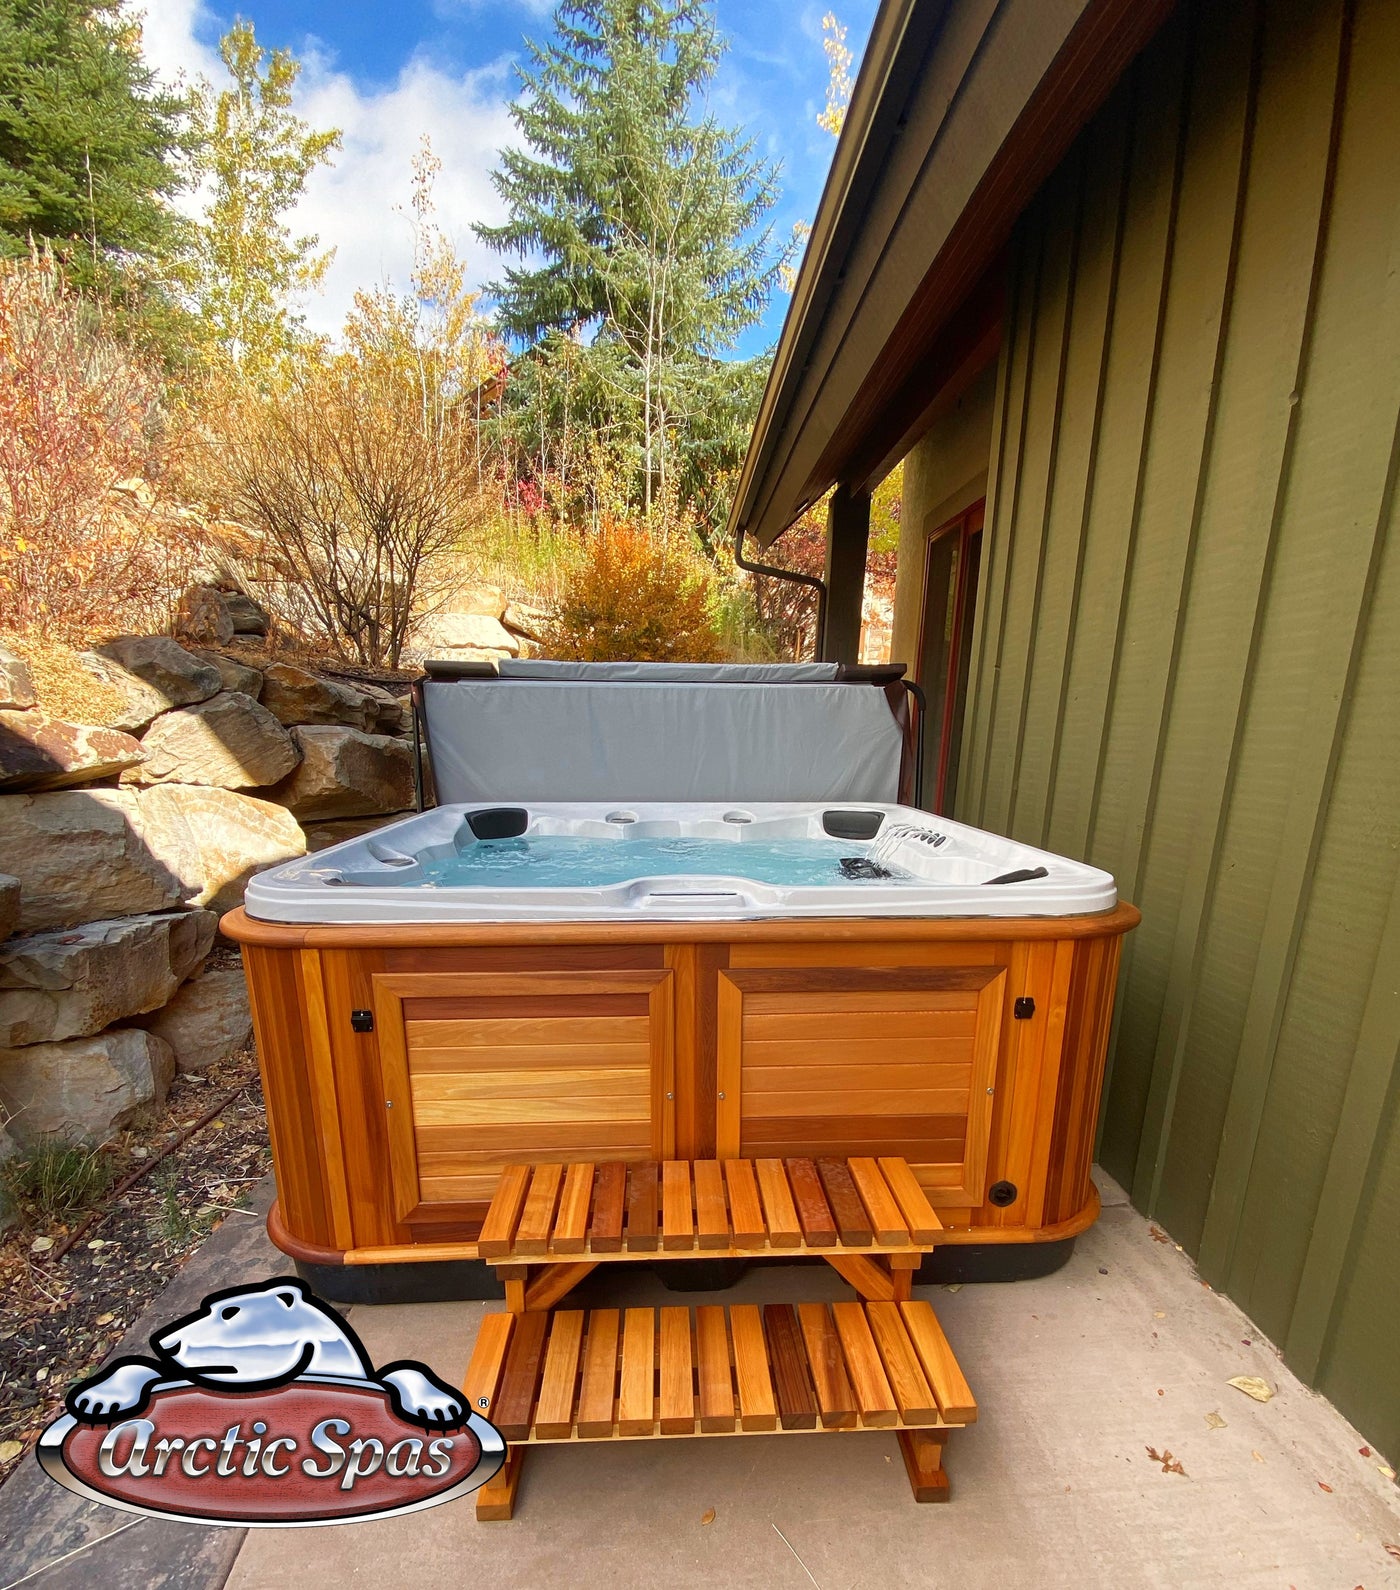 Featured Spa of the Week: Arctic Spas Yukon Model